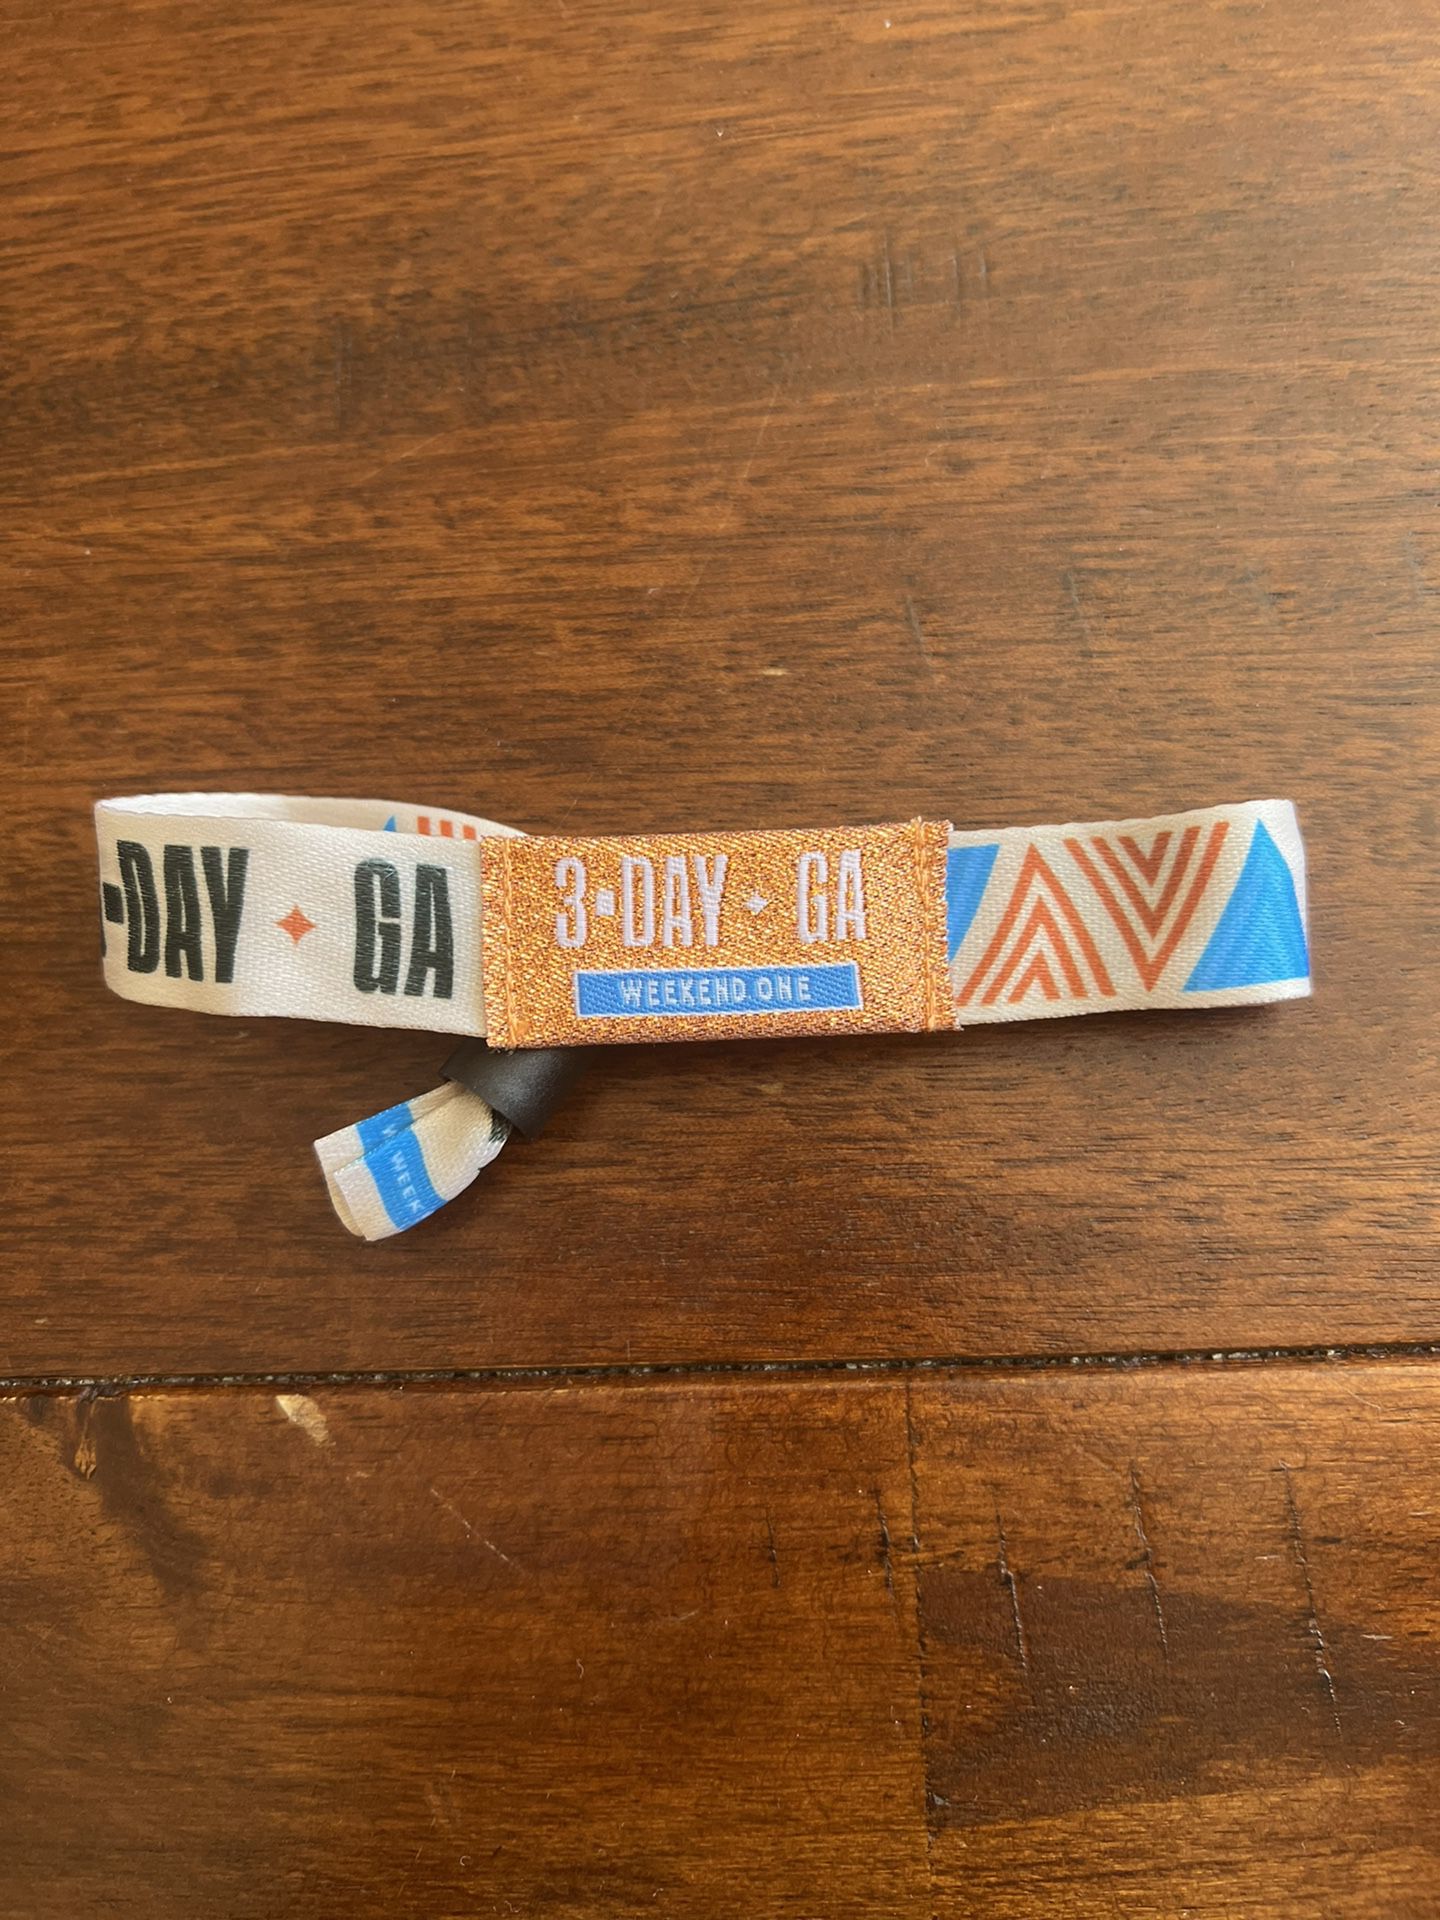 ACL 3 Day Wristband Weekend 1 (Oct 7- 9)